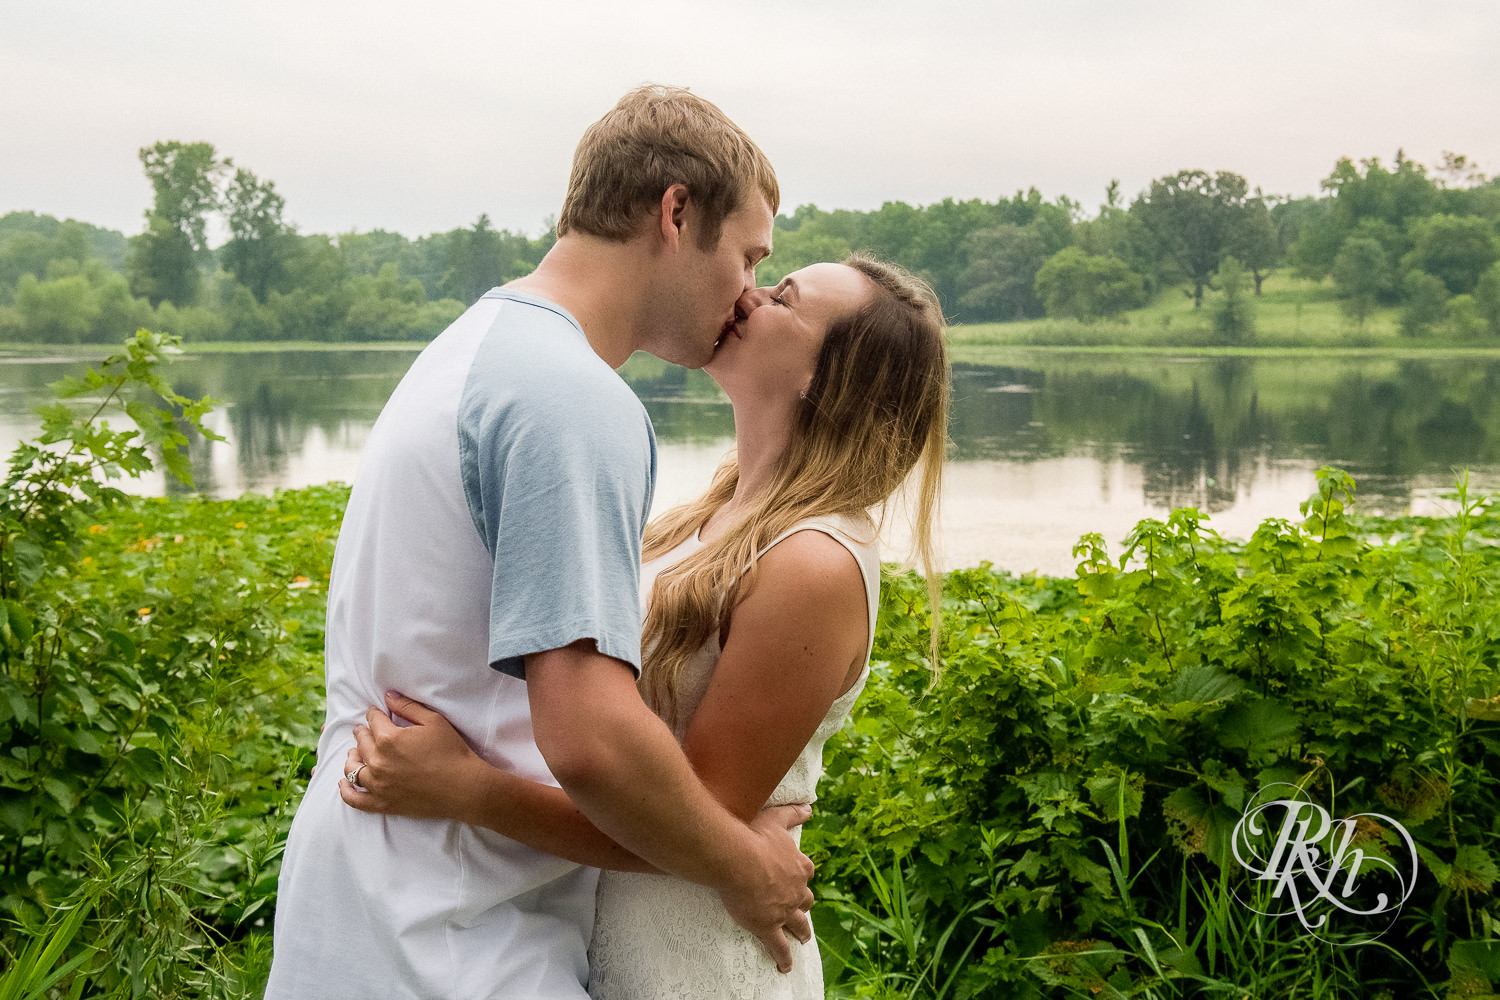 Man and woman kiss each other in Lebanon Hills Regional Park in Eagan, Minnesota.